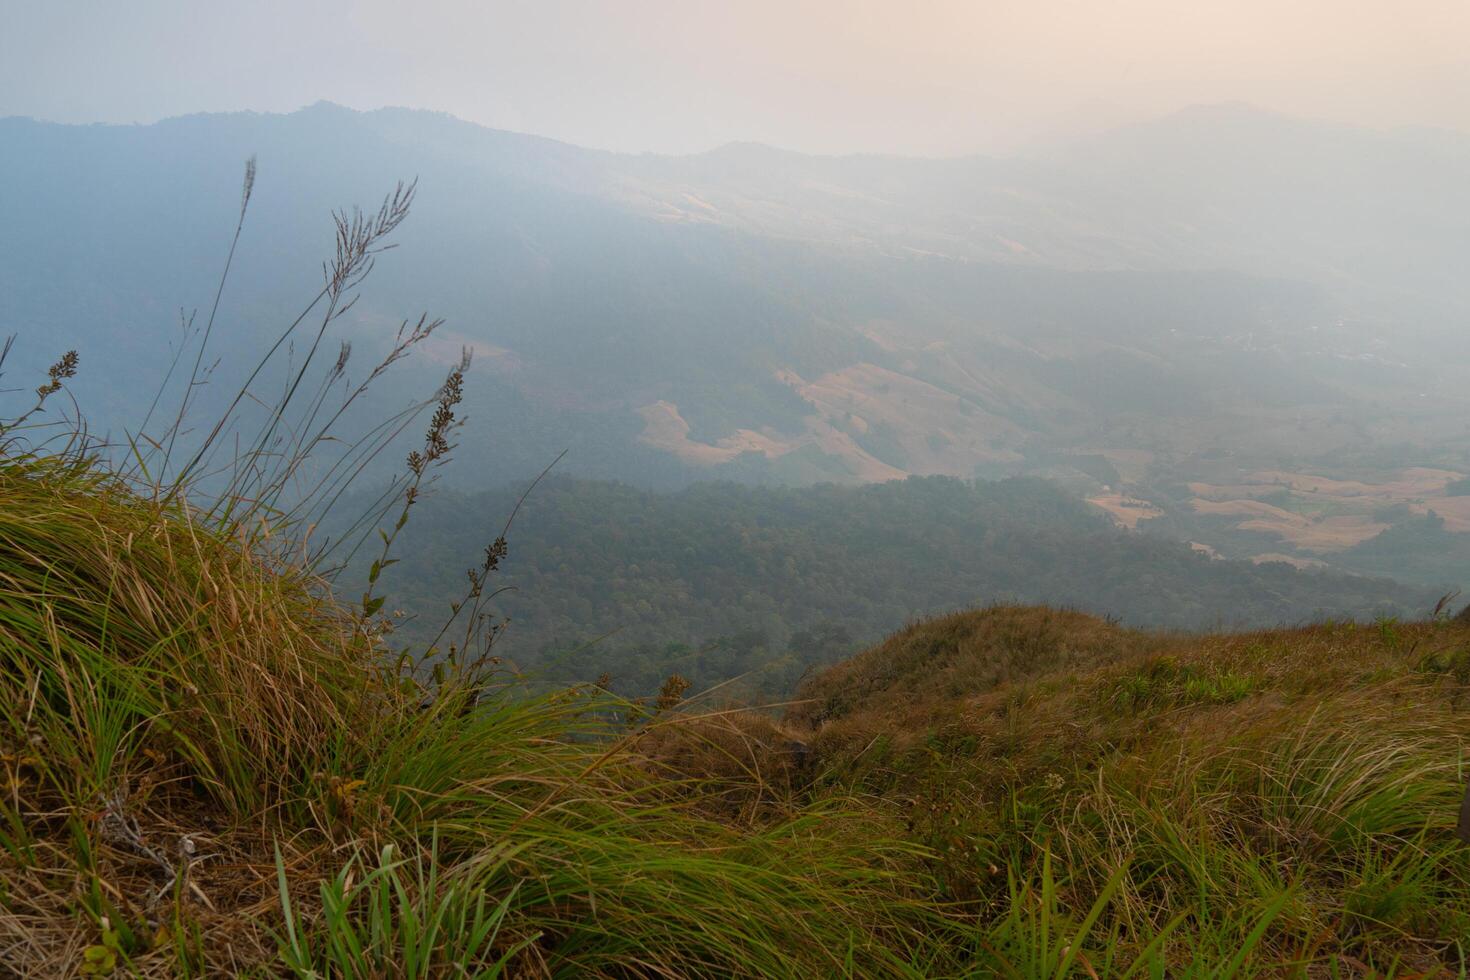 The foreground is covered with grass. Landscape view of mountain ranges lined up background. Under fog covers the sky. At Phu Langka Phayao Province of Thailand. photo